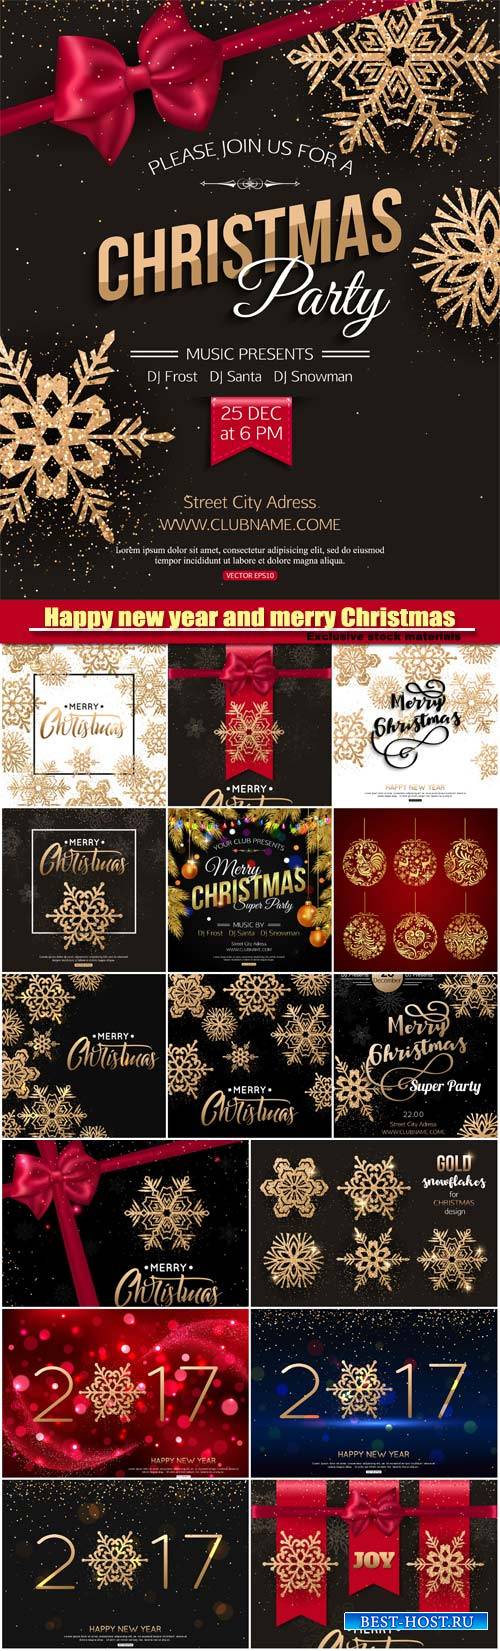 Merry Christmas and Happy new year vector, snowflakes background